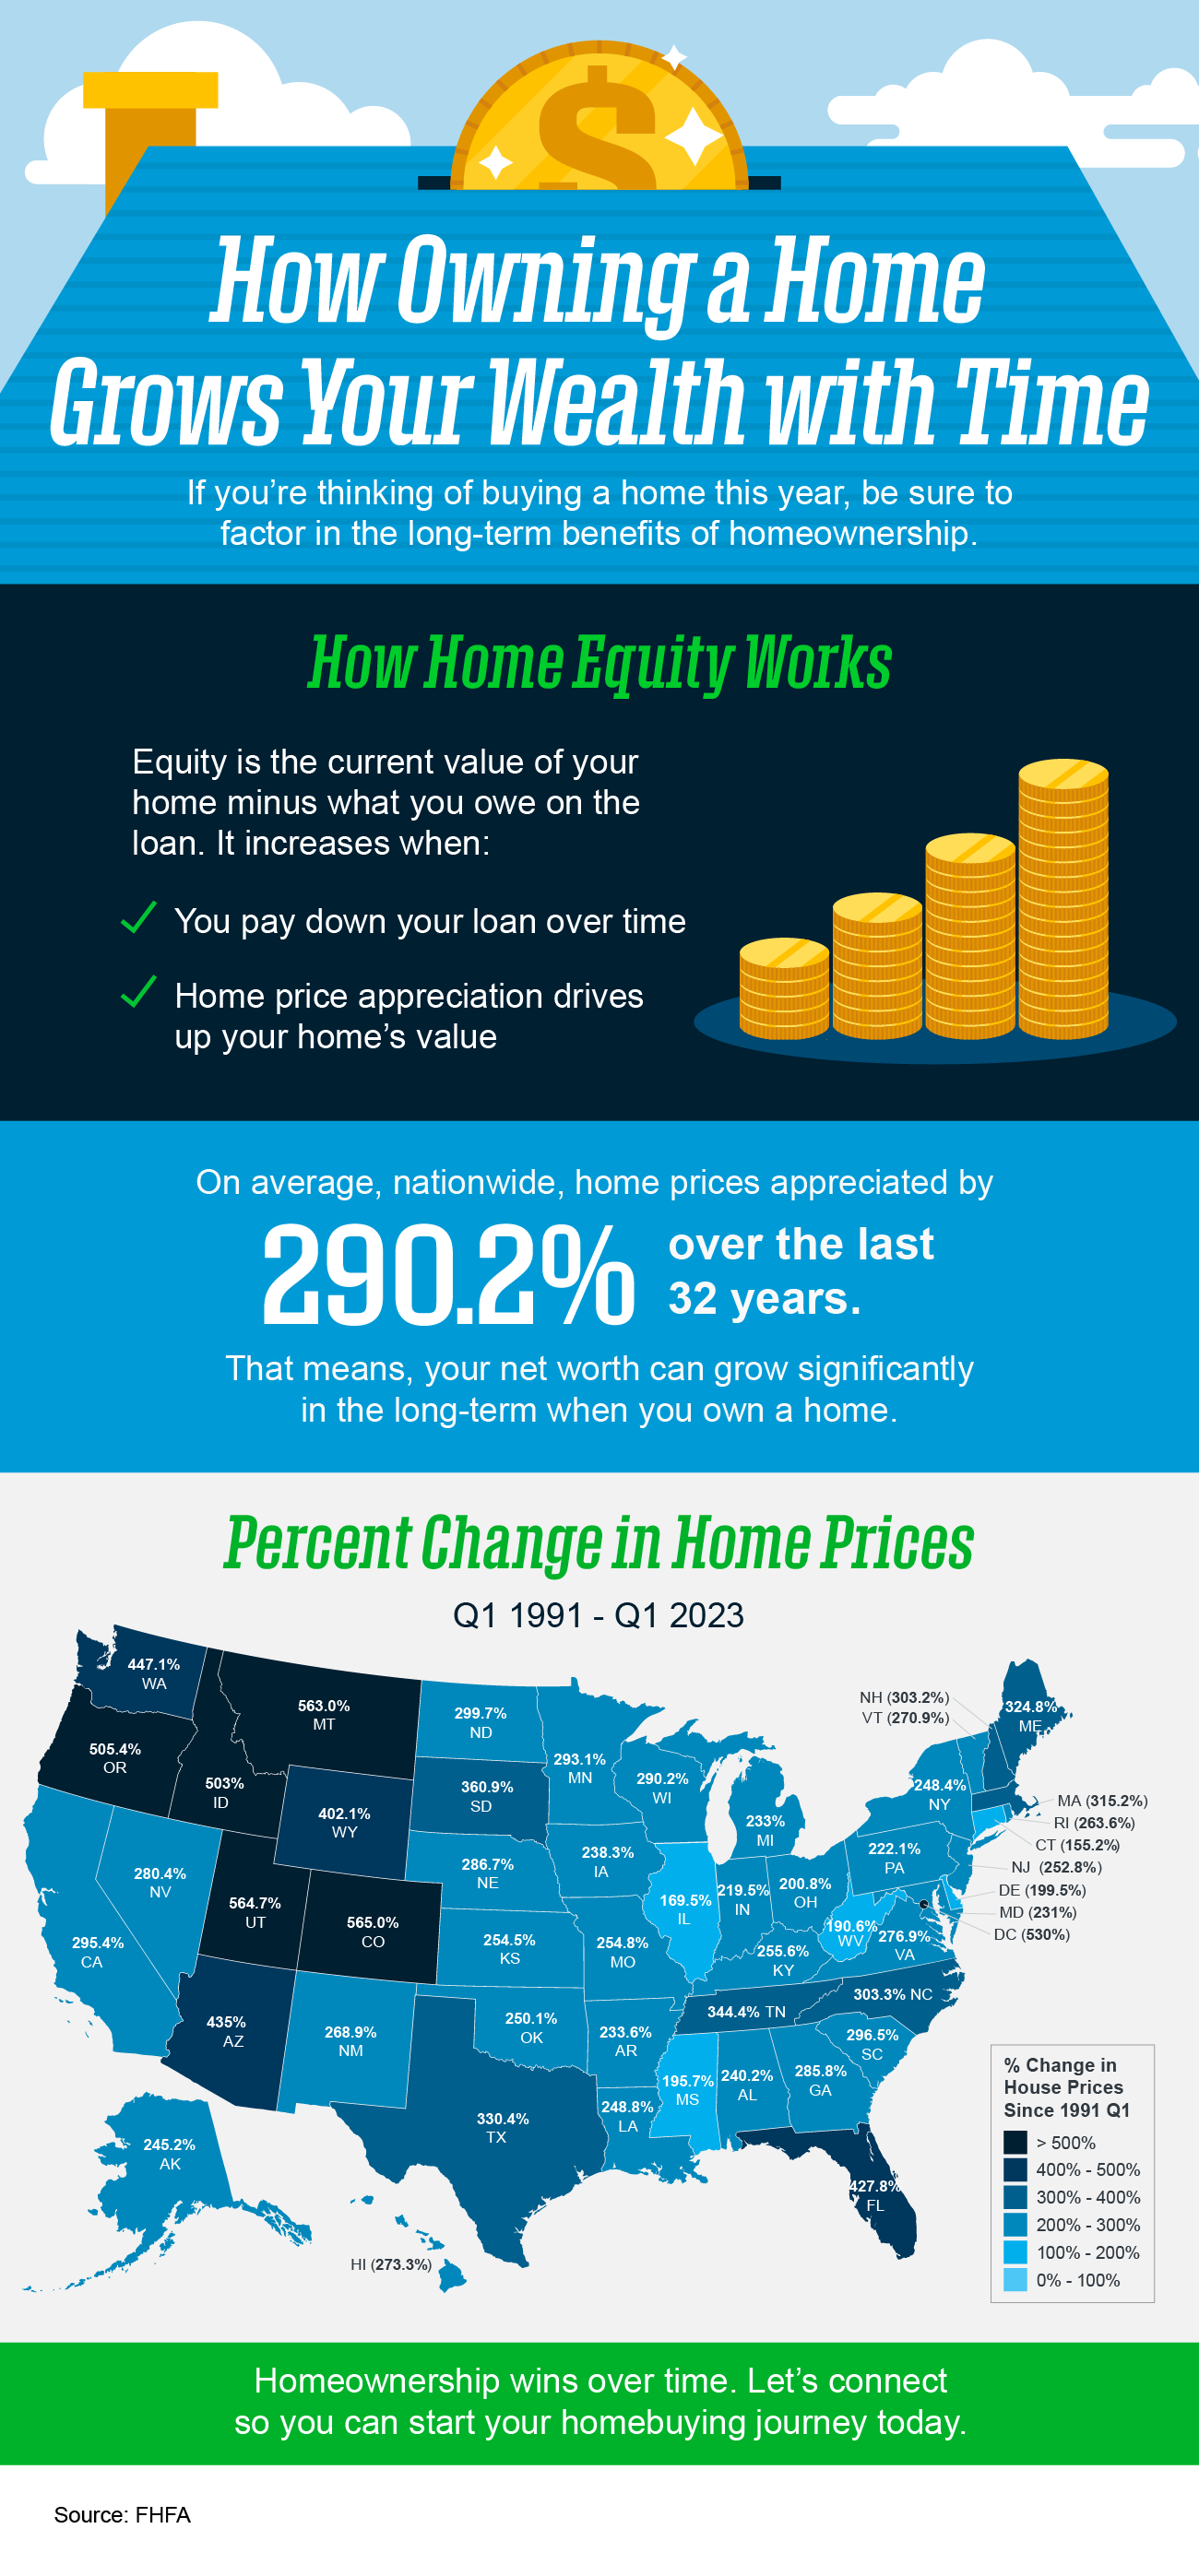 Home Owning a Home Grows Your Wealth with Time - KM Realty Group LLC, Chicago